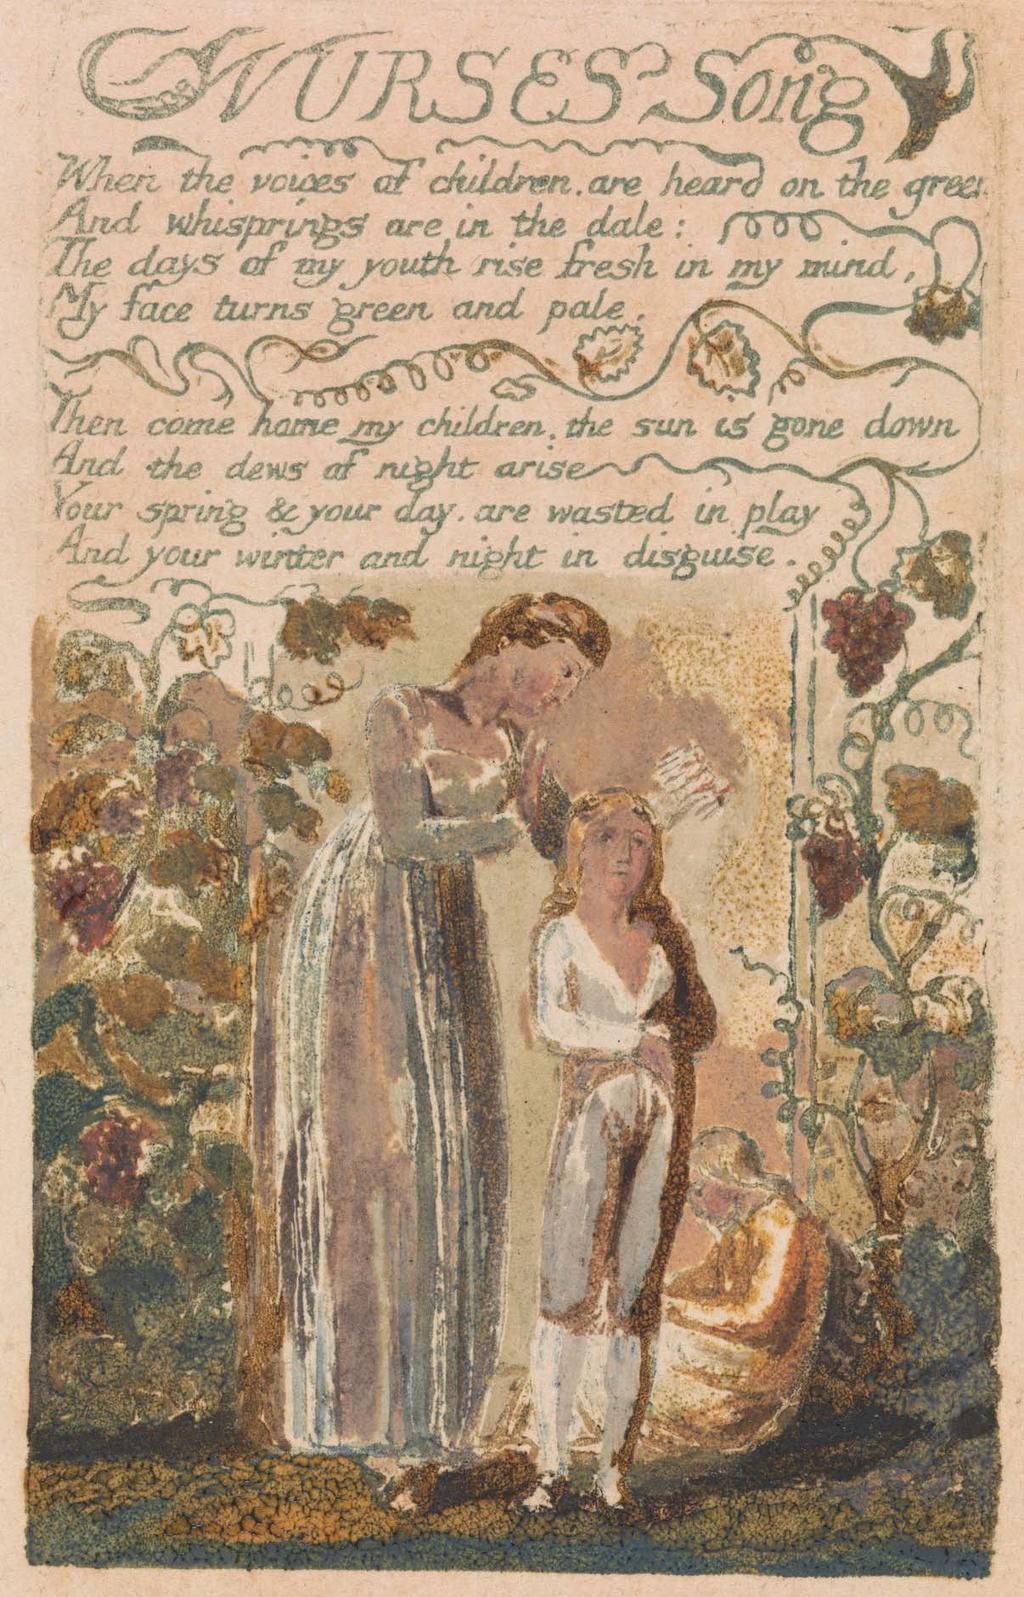 Songs of Innocence and of Experience, Plate 37, "Nurses Song" (Bentley 38), 1794